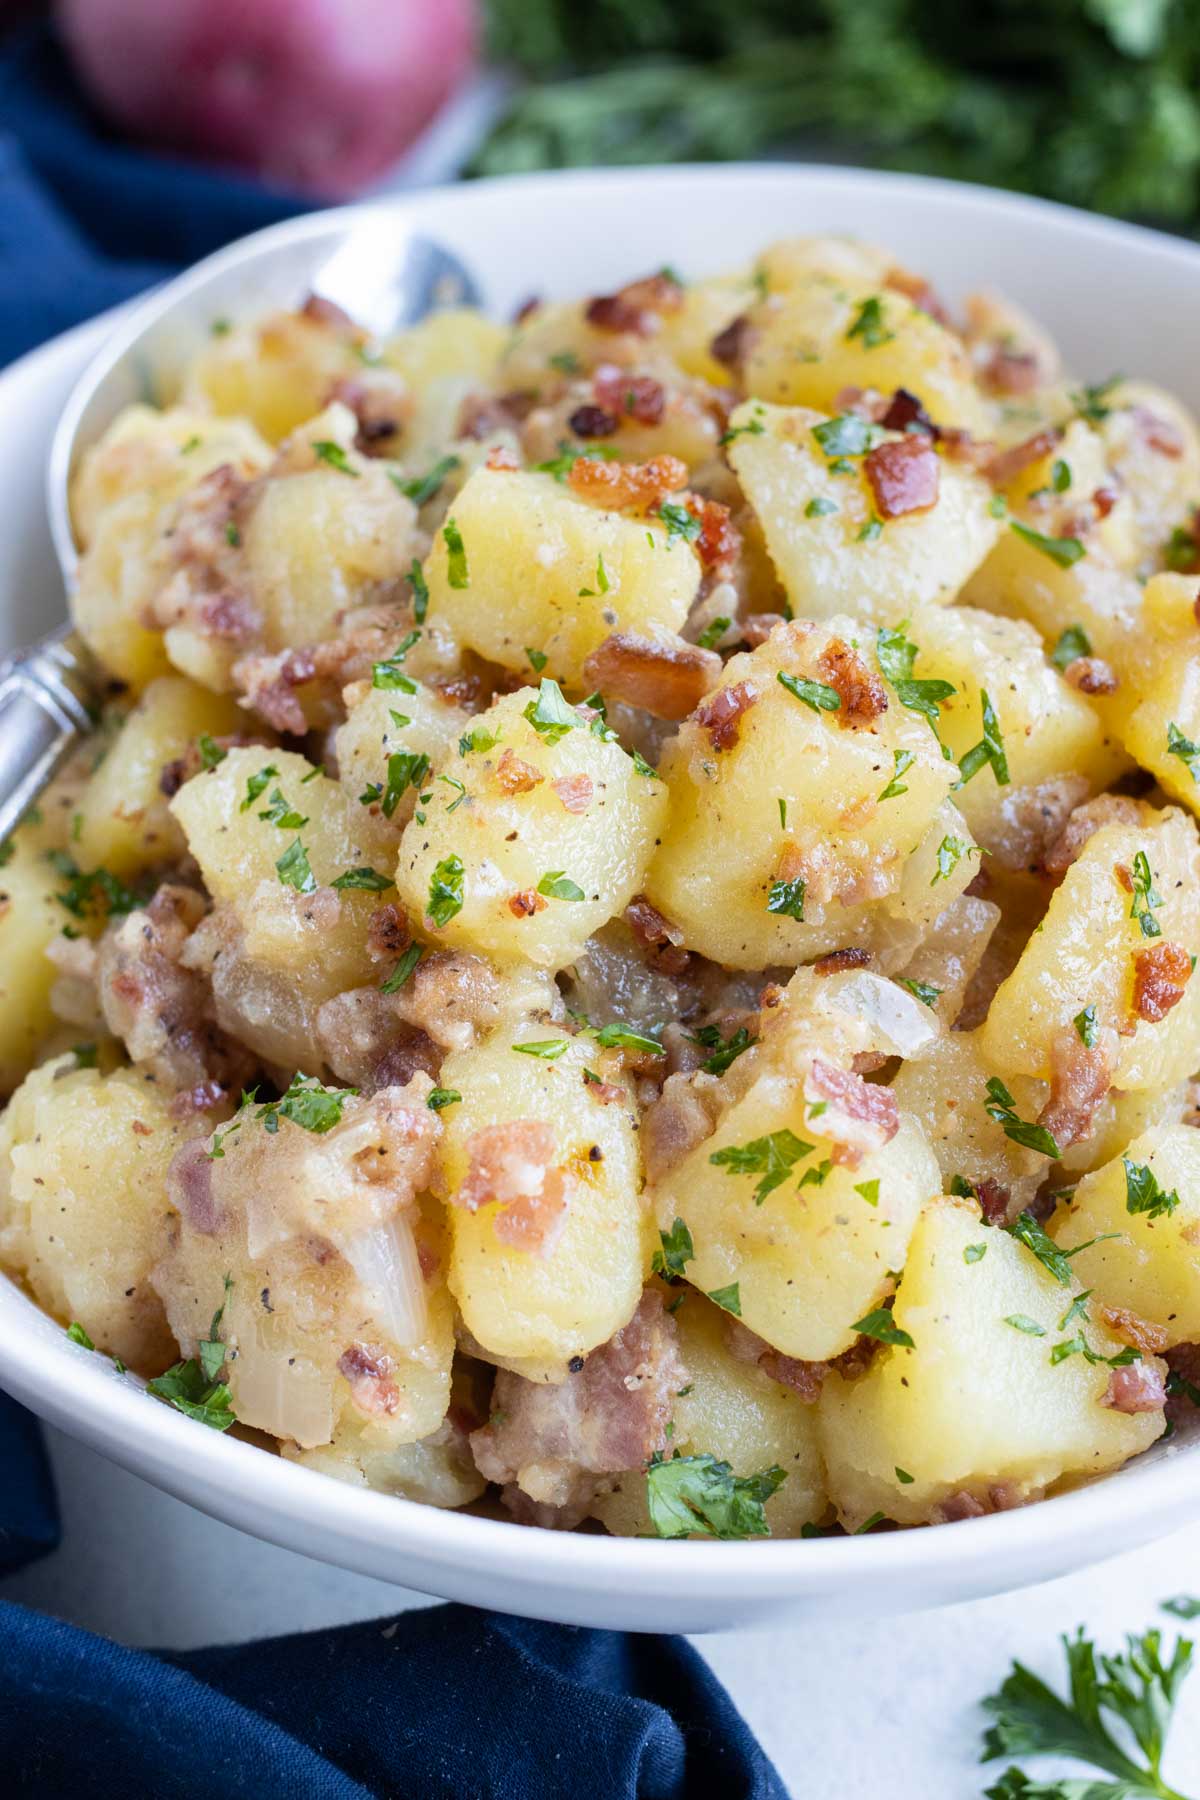 Old-Fashioned German Potato Salad RECIPE served in a white bowl with a spoon.